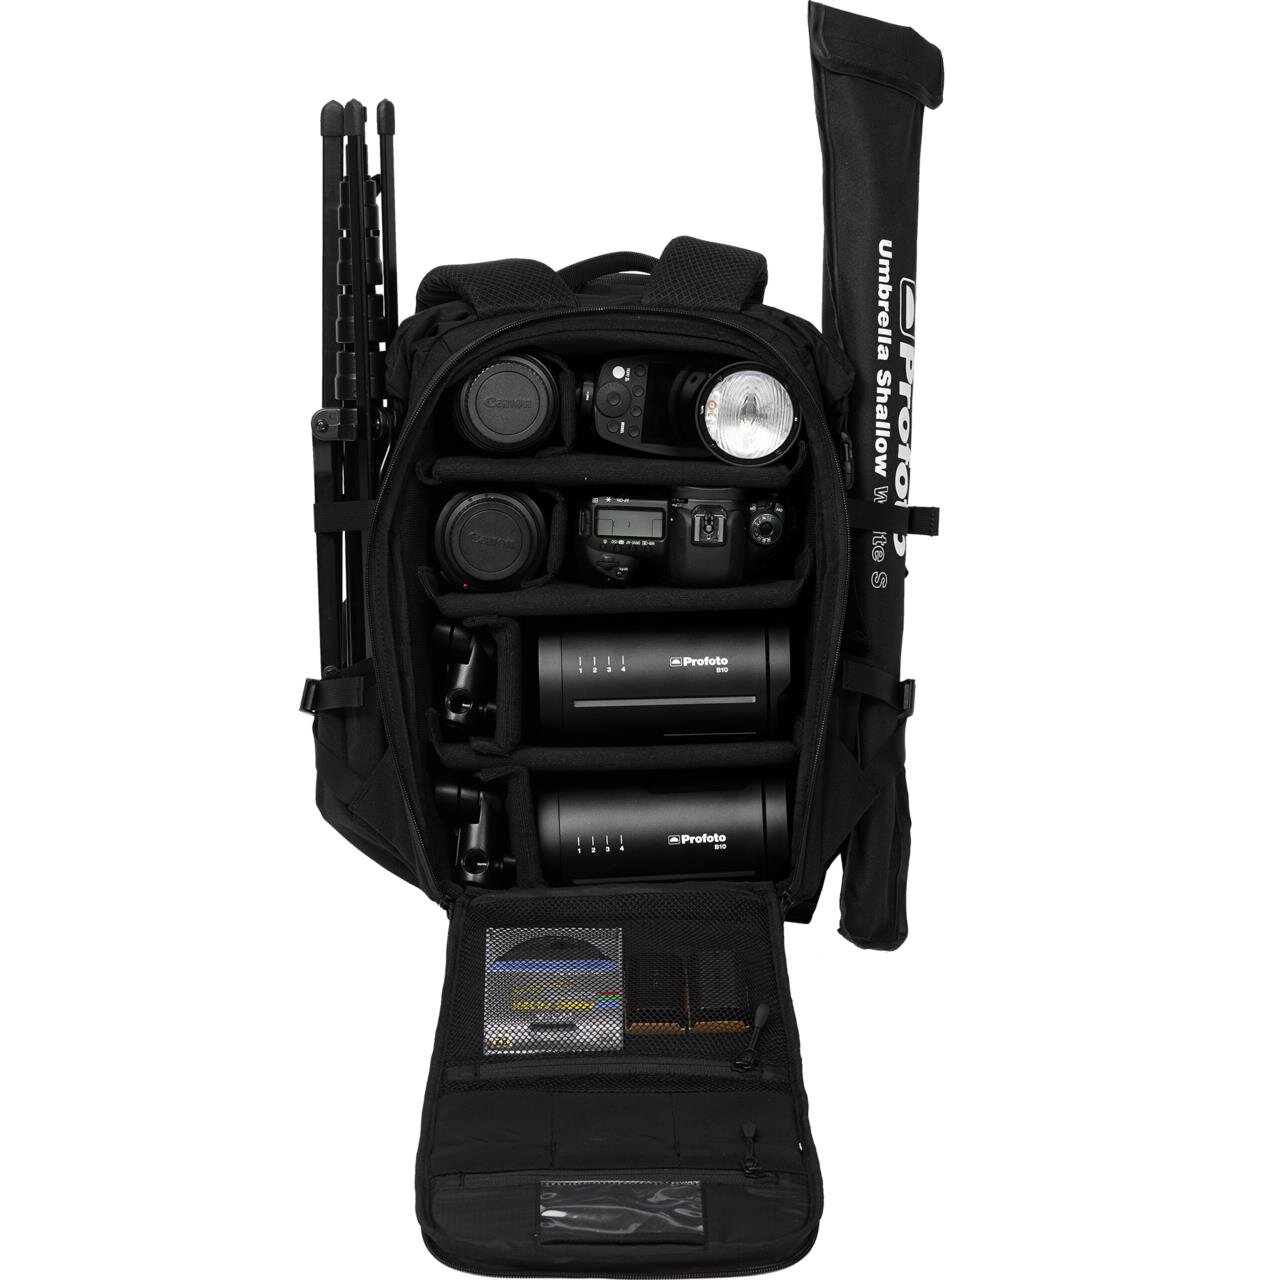 330241_l_profoto-core-backpack-s-packed-open_productimage.png.jpeg